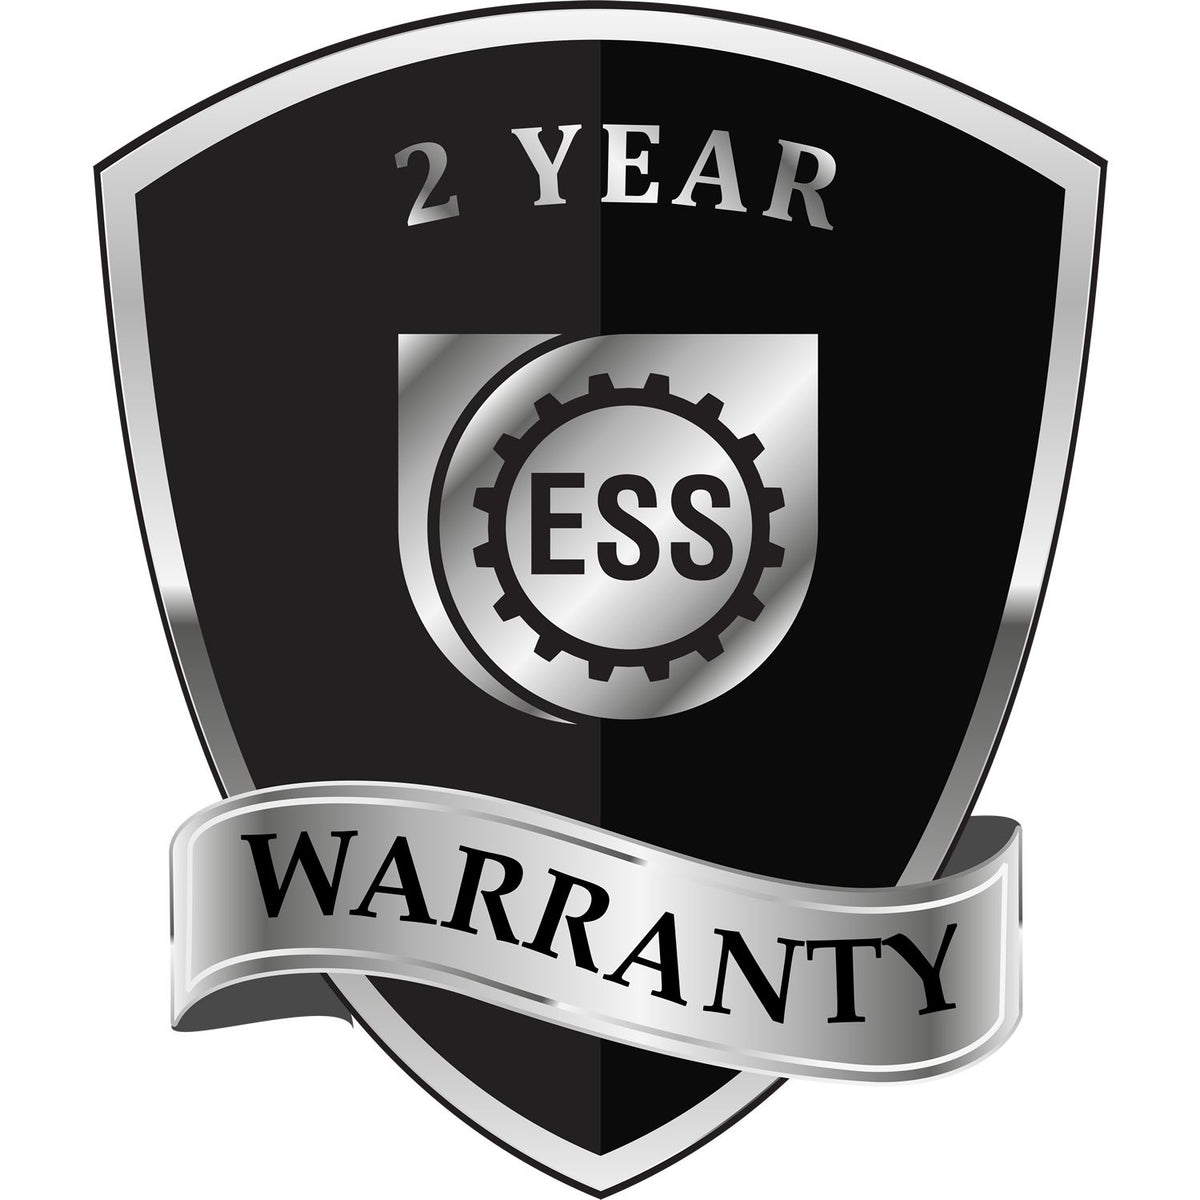 A badge or emblem showing a warranty icon for the Heavy Duty Cast Iron Michigan Land Surveyor Seal Embosser